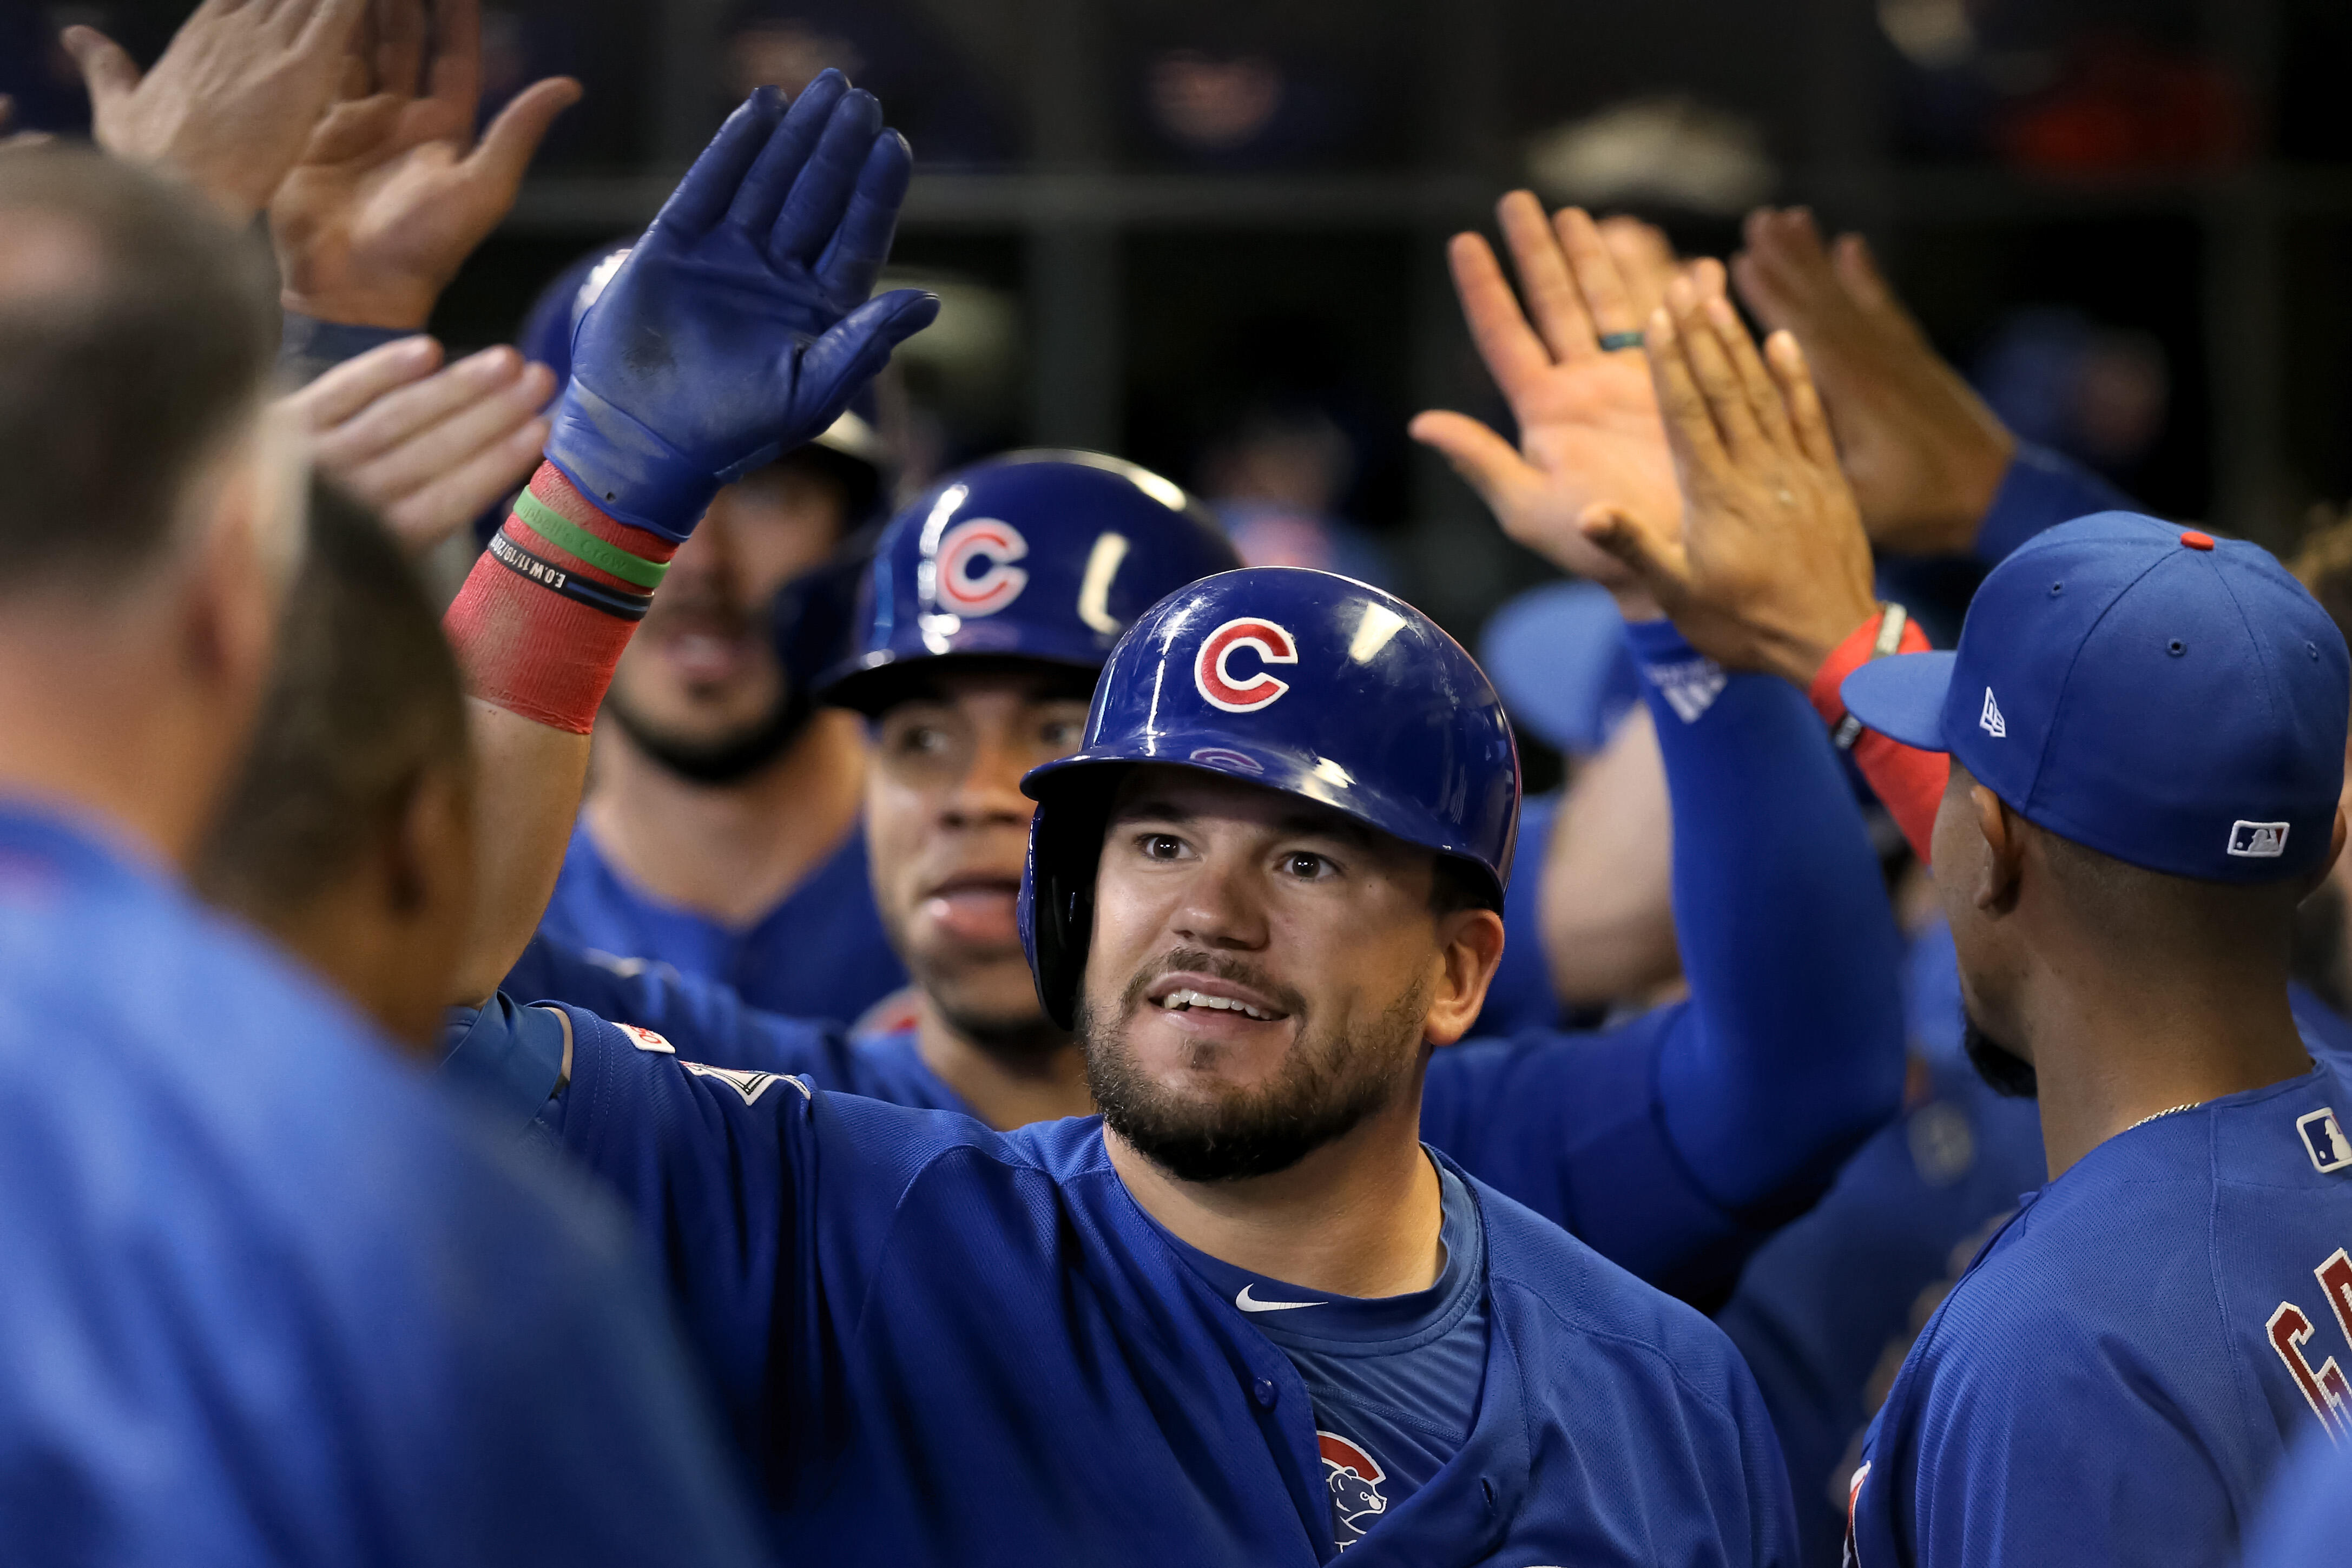 Kyle Schwarber of the Cubs Got Married This Weekend